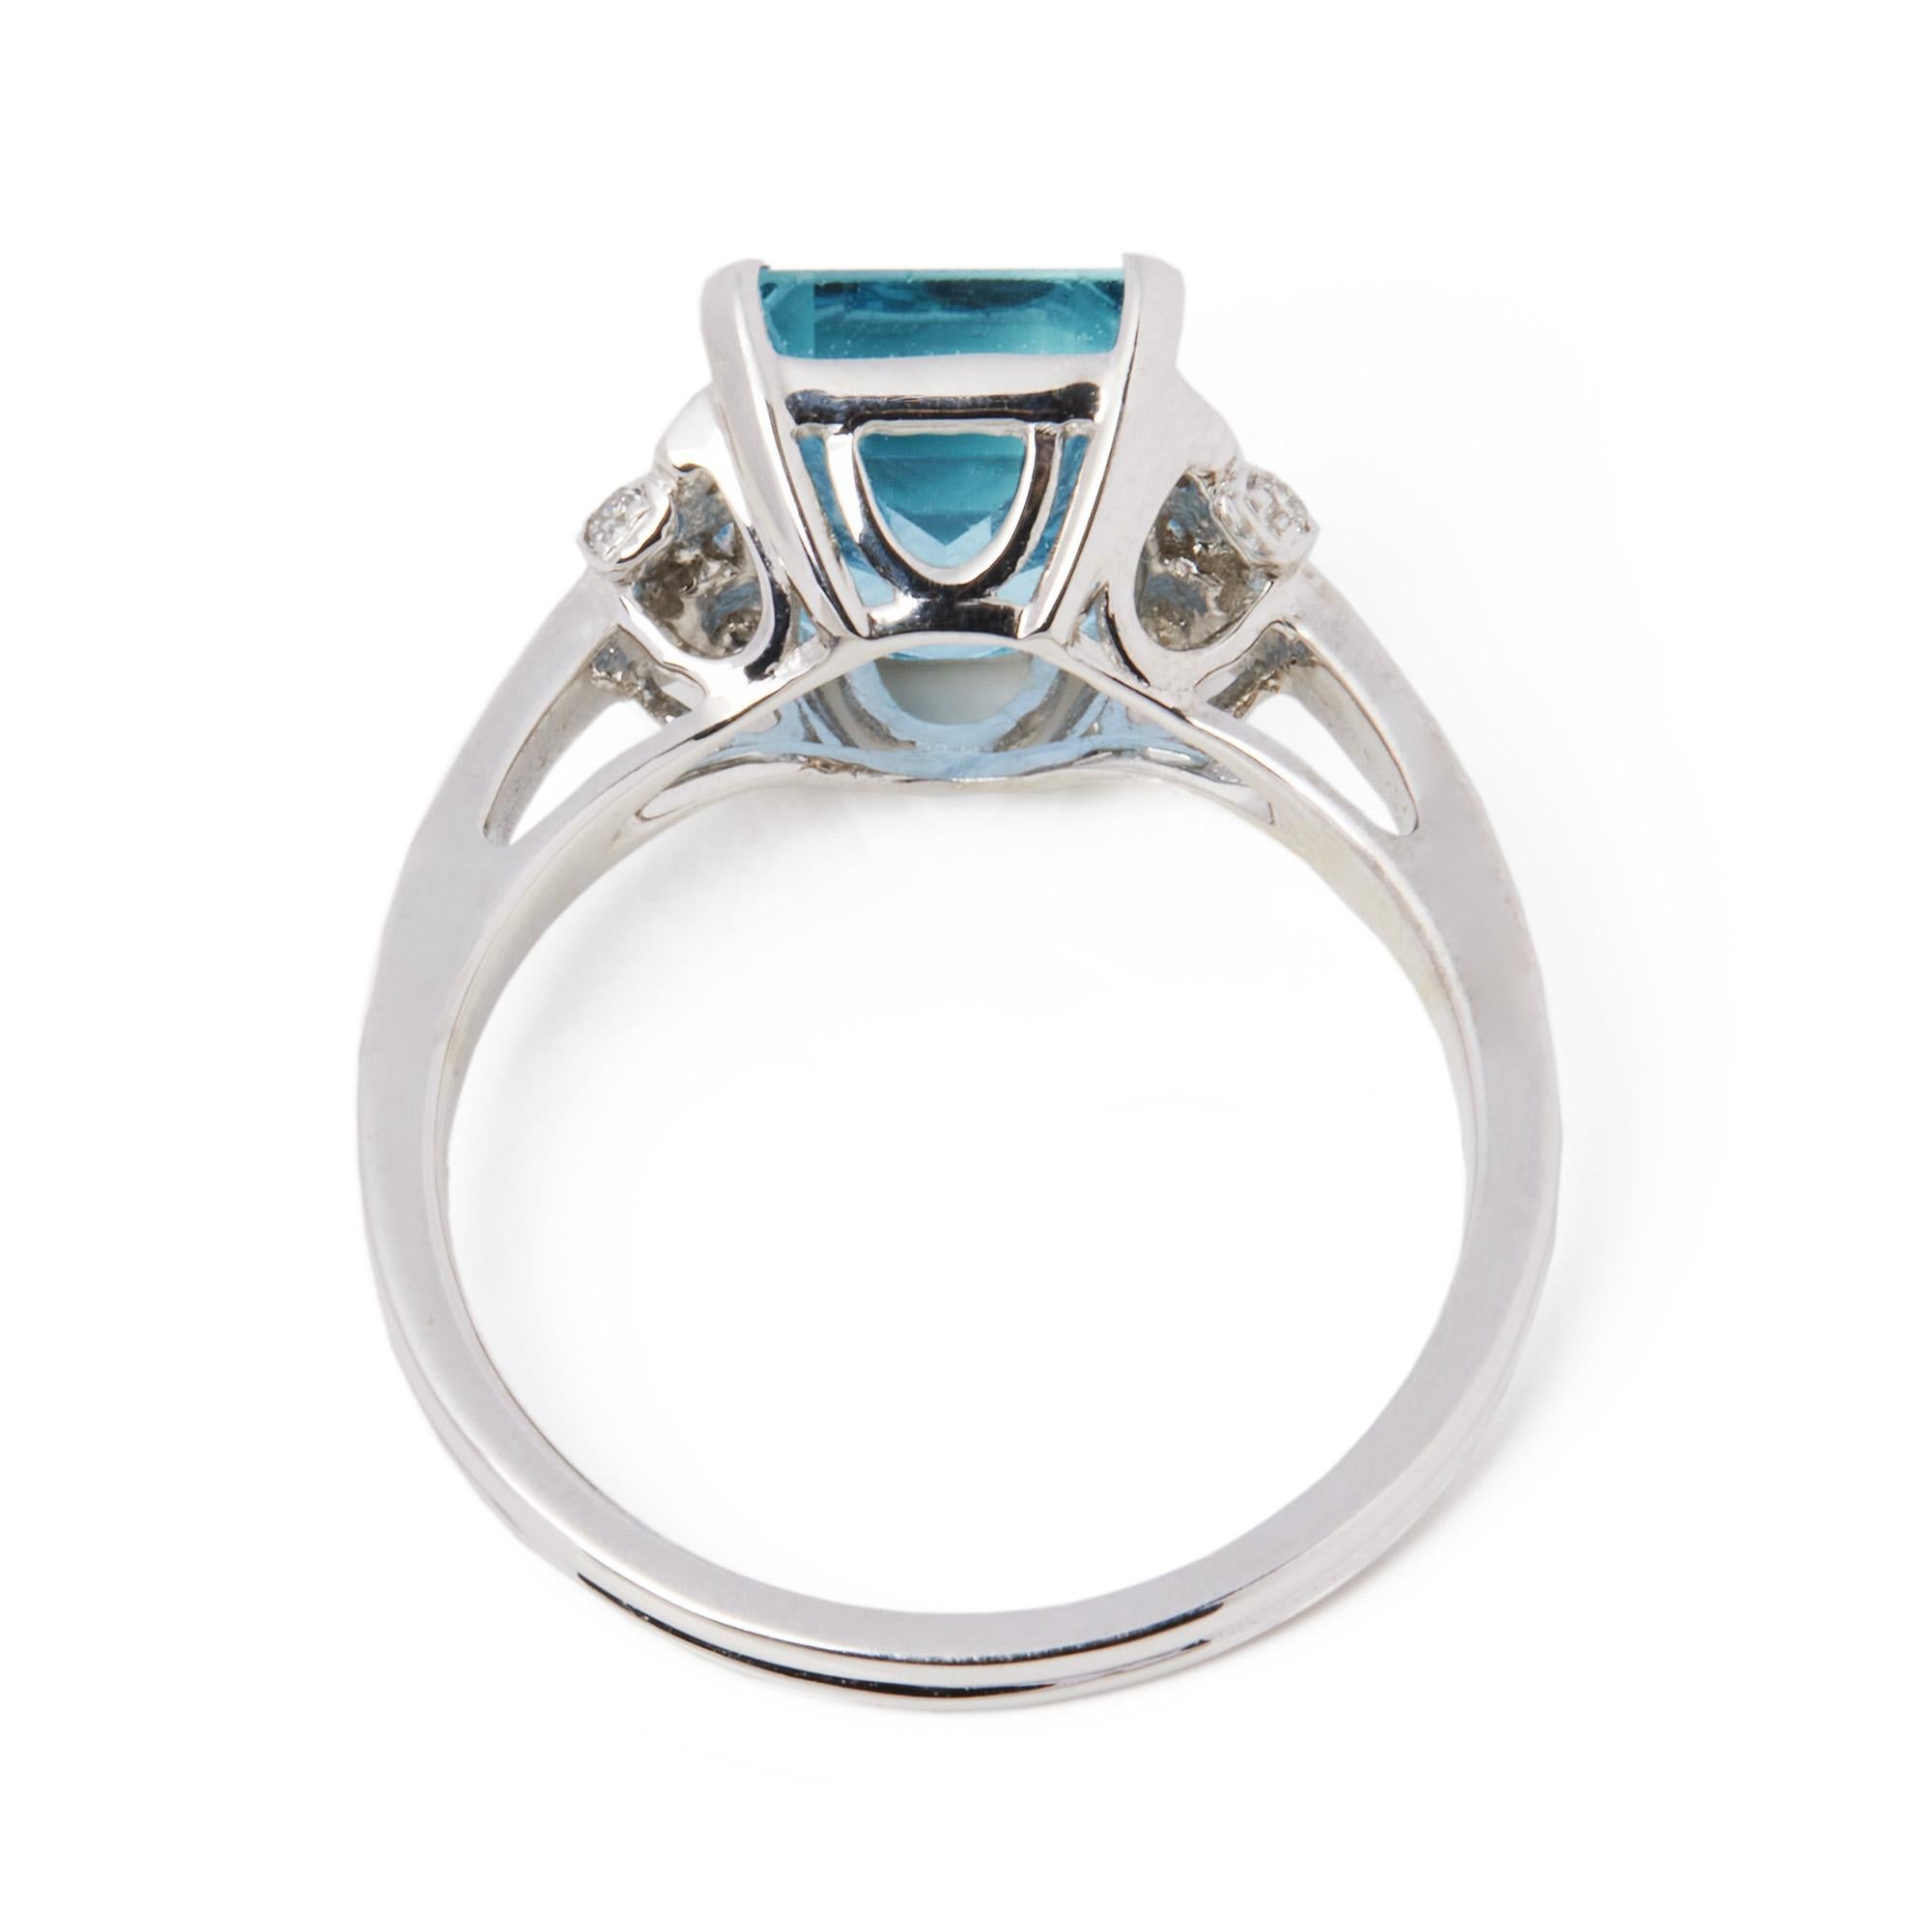 Contemporary David Jerome Certified 3.22ct Emerald Cut Aquamarine and Diamond Ring For Sale